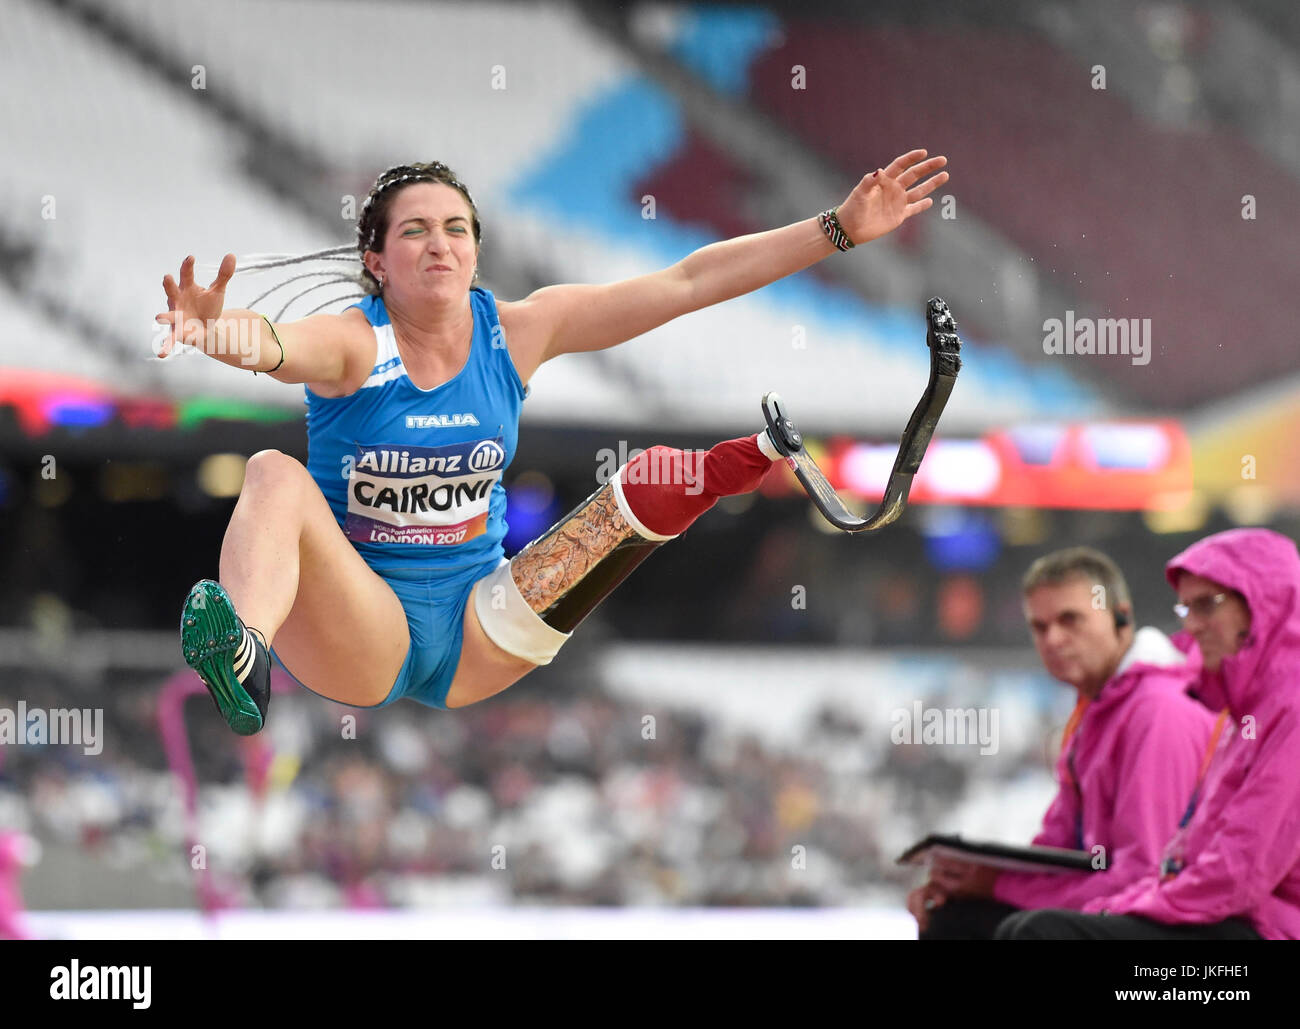 Womens High Jump High Resolution Stock Photography And Images Alamy